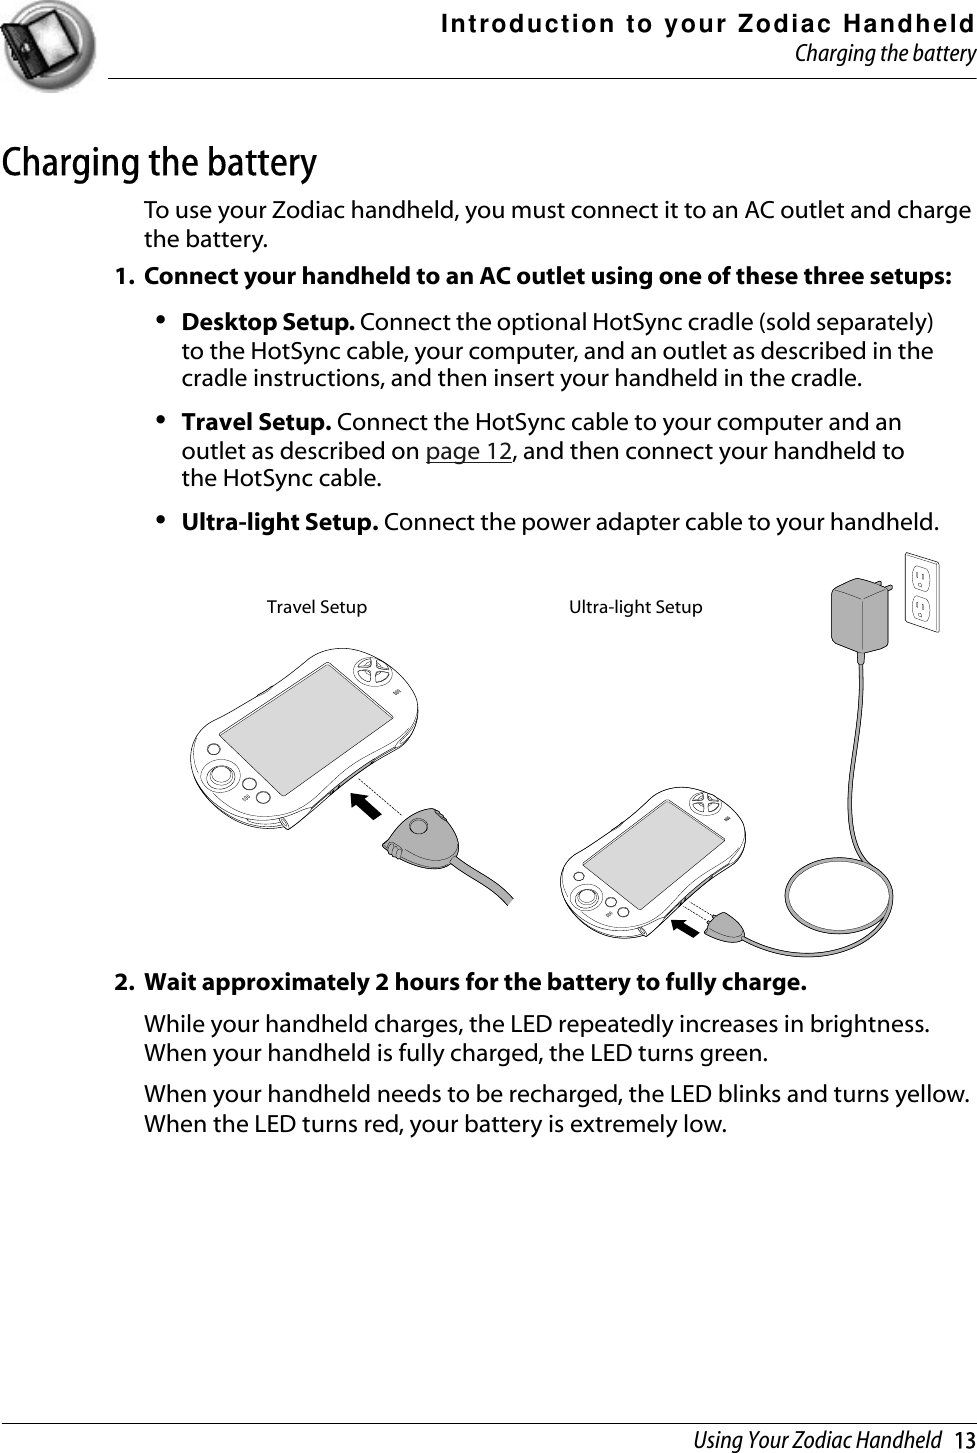 Introduction to your Zodiac HandheldCharging the batteryUsing Your Zodiac Handheld   13Charging the batteryTo use your Zodiac handheld, you must connect it to an AC outlet and charge the battery. 1. Connect your handheld to an AC outlet using one of these three setups:•Desktop Setup. Connect the optional HotSync cradle (sold separately) to the HotSync cable, your computer, and an outlet as described in the cradle instructions, and then insert your handheld in the cradle.•Travel Setup. Connect the HotSync cable to your computer and an outlet as described on page 12, and then connect your handheld to the HotSync cable.•Ultra-light Setup. Connect the power adapter cable to your handheld.2. Wait approximately 2 hours for the battery to fully charge.While your handheld charges, the LED repeatedly increases in brightness. When your handheld is fully charged, the LED turns green.When your handheld needs to be recharged, the LED blinks and turns yellow. When the LED turns red, your battery is extremely low.Travel Setup Ultra-light Setup